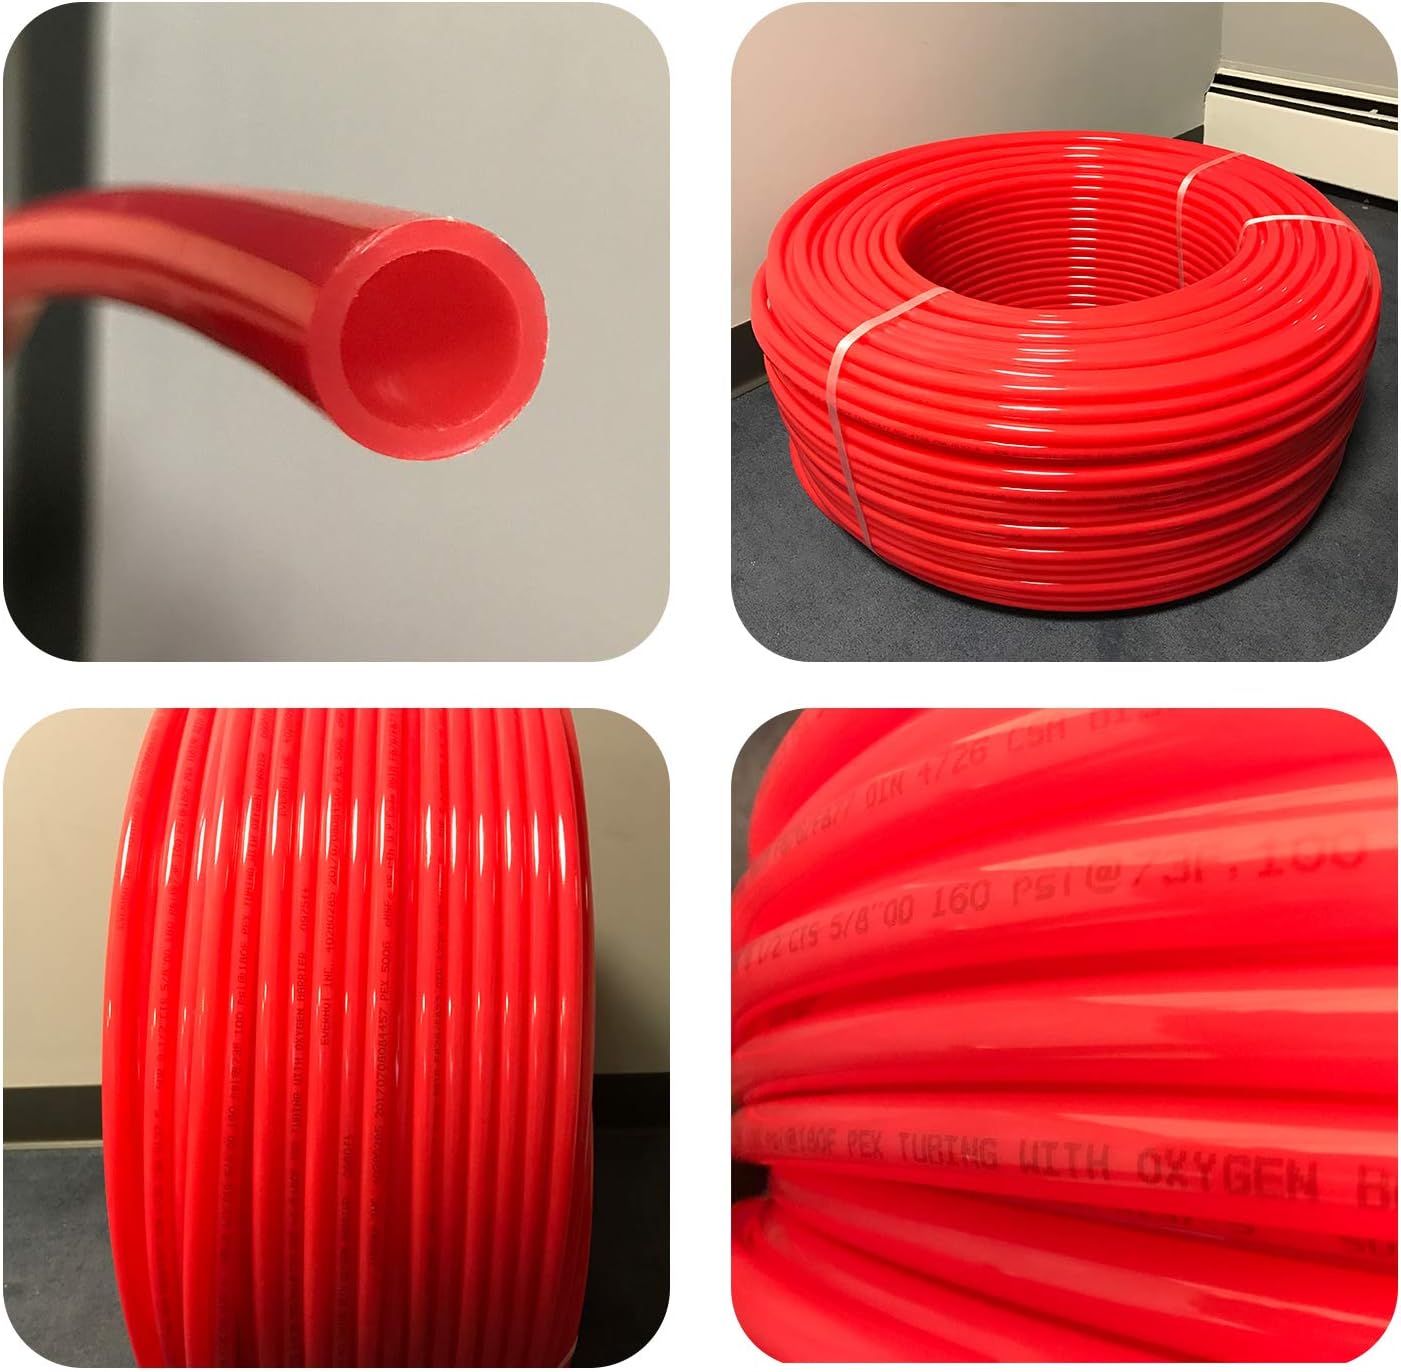 1" x 500' PEX-A Potable Water - 500' Coil - Red